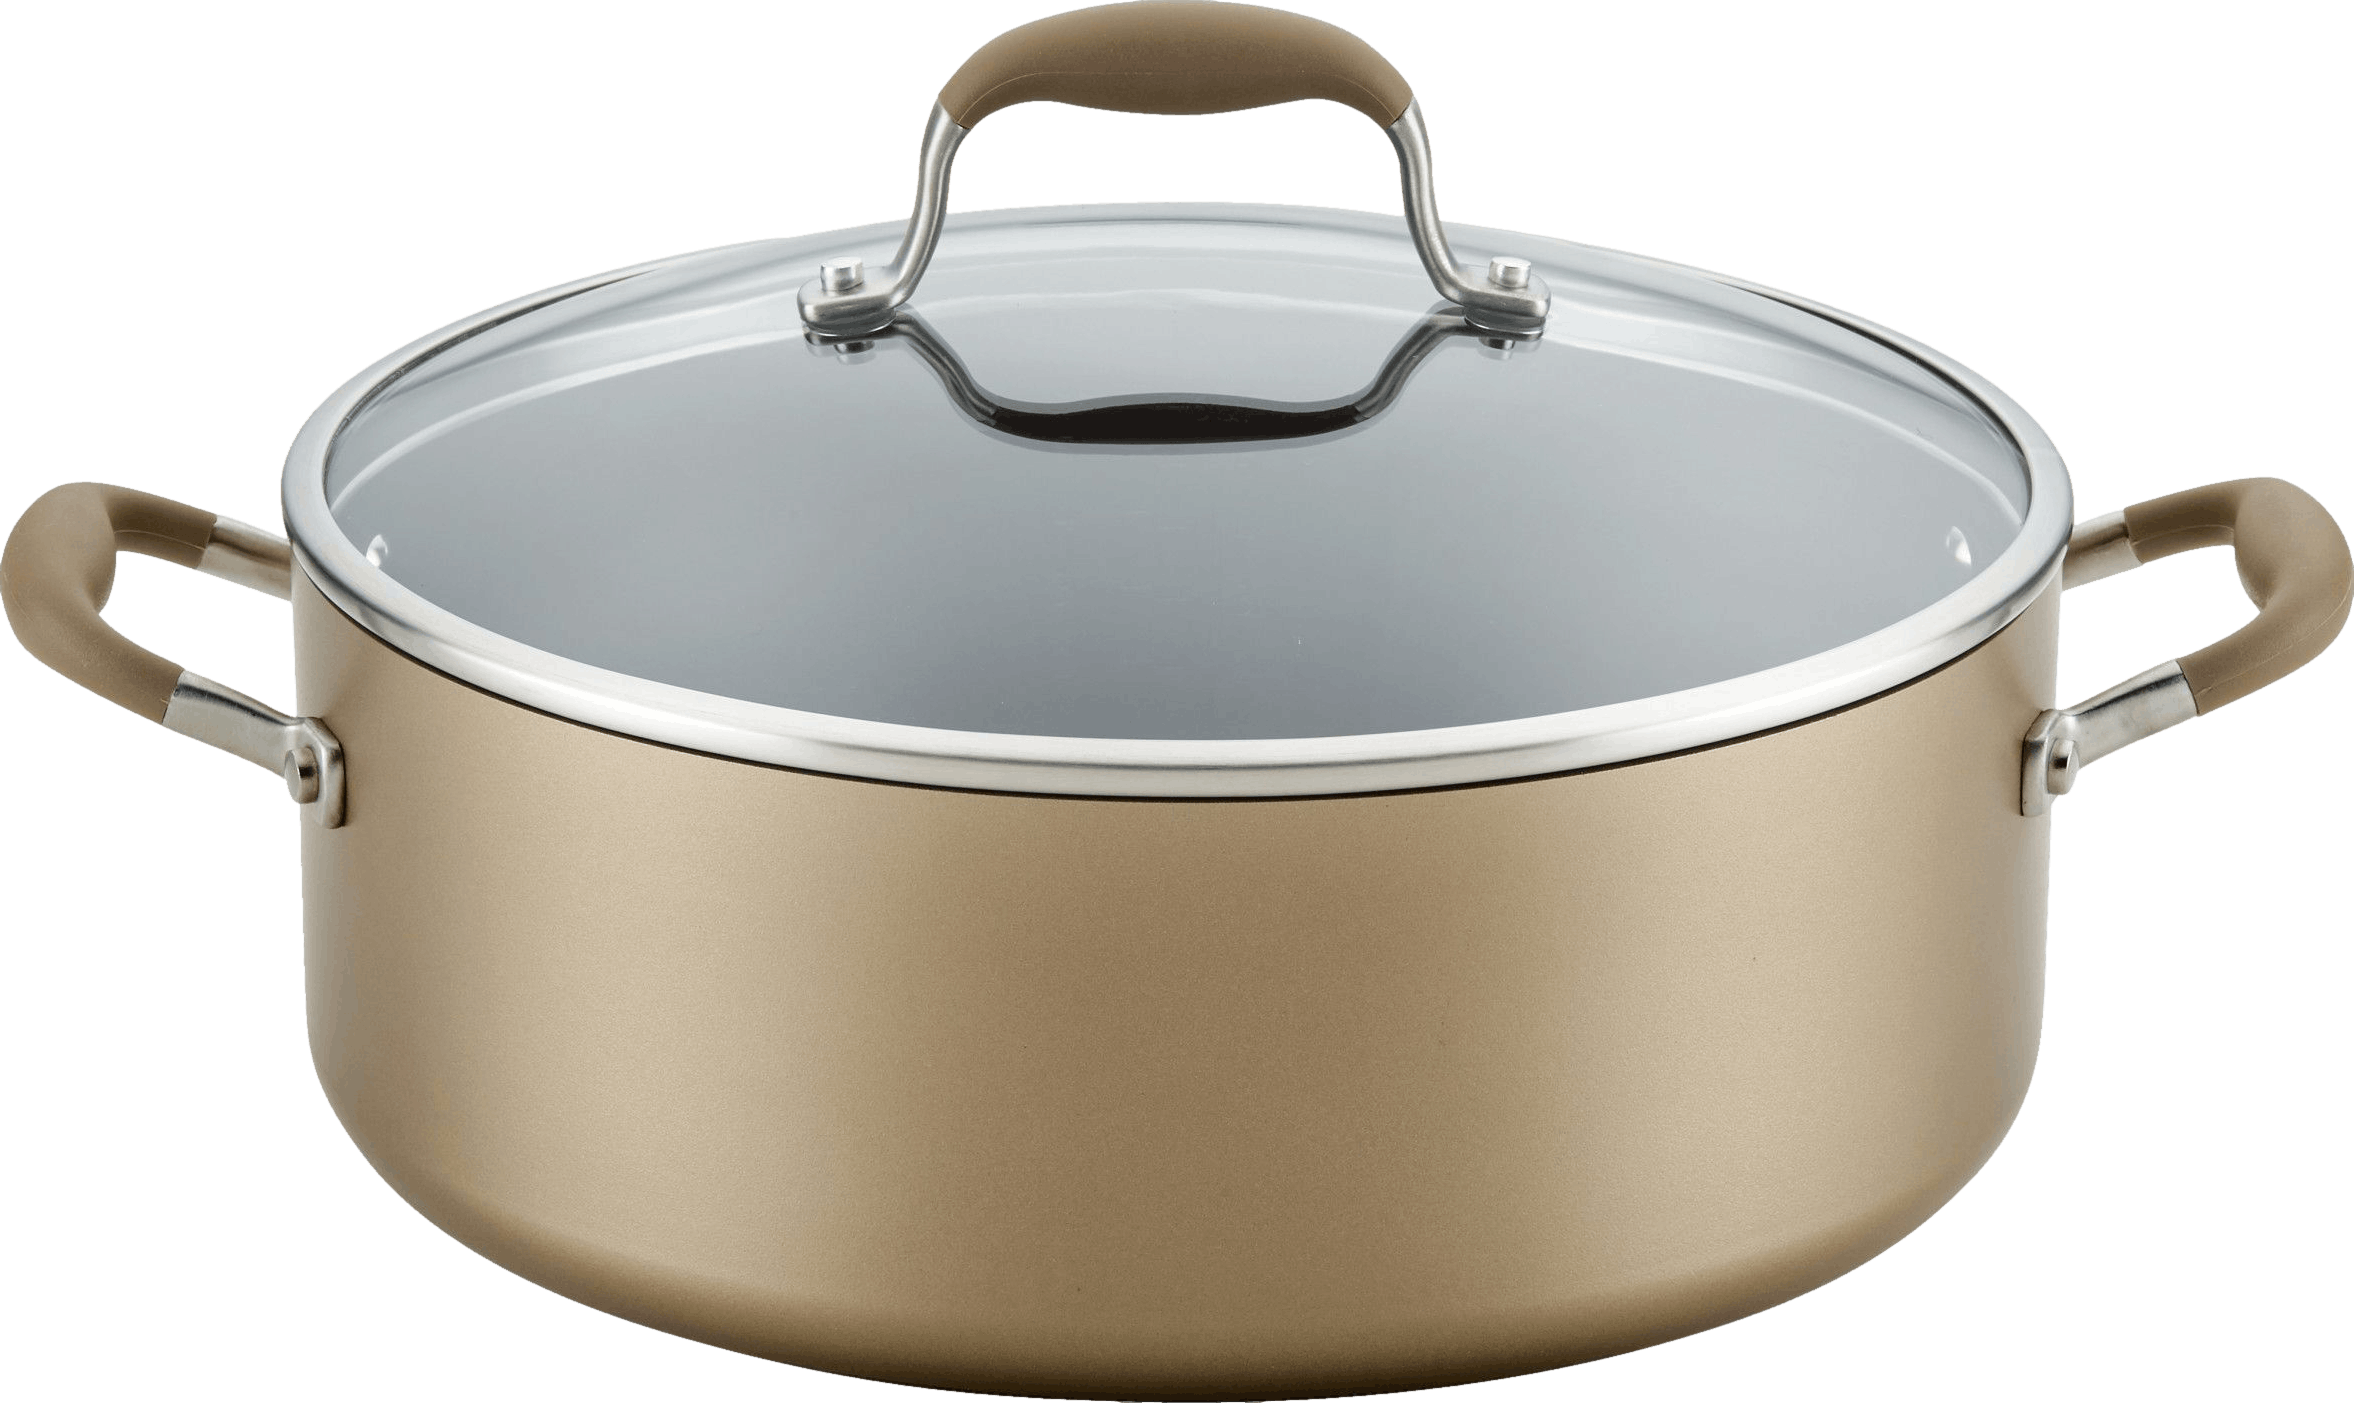 Anolon Advanced Home Hard-Anodized Nonstick Wide Stockpot with Lid, 7.5-Quart, Bronze